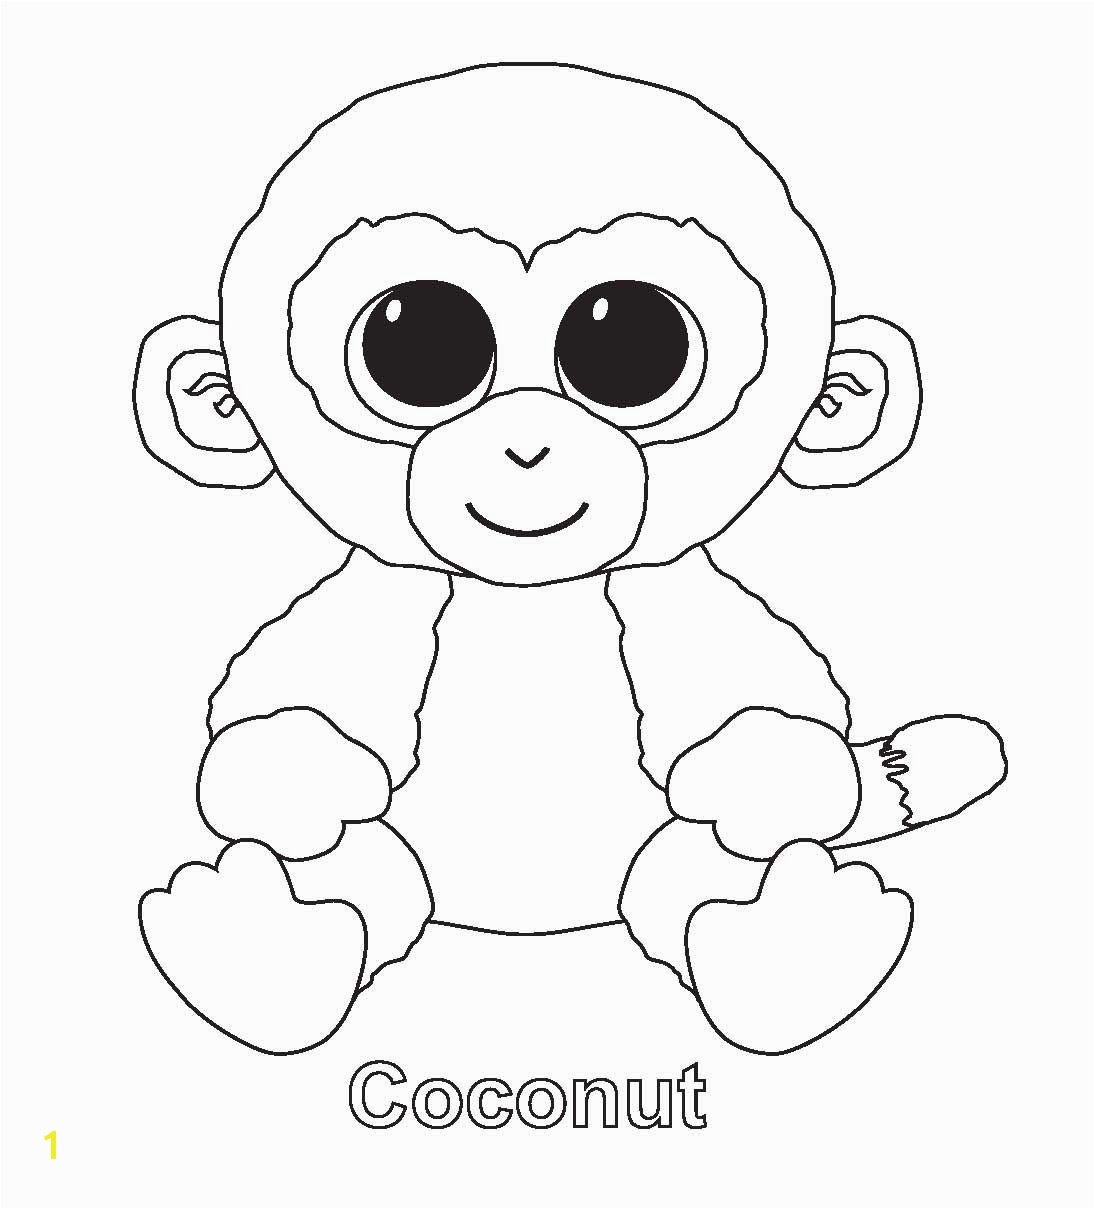 Ty Beanie Babies Coloring Pages Beanie Boo Coloring Pages Cute Drawing Ideas Pinterest Coloring Pages